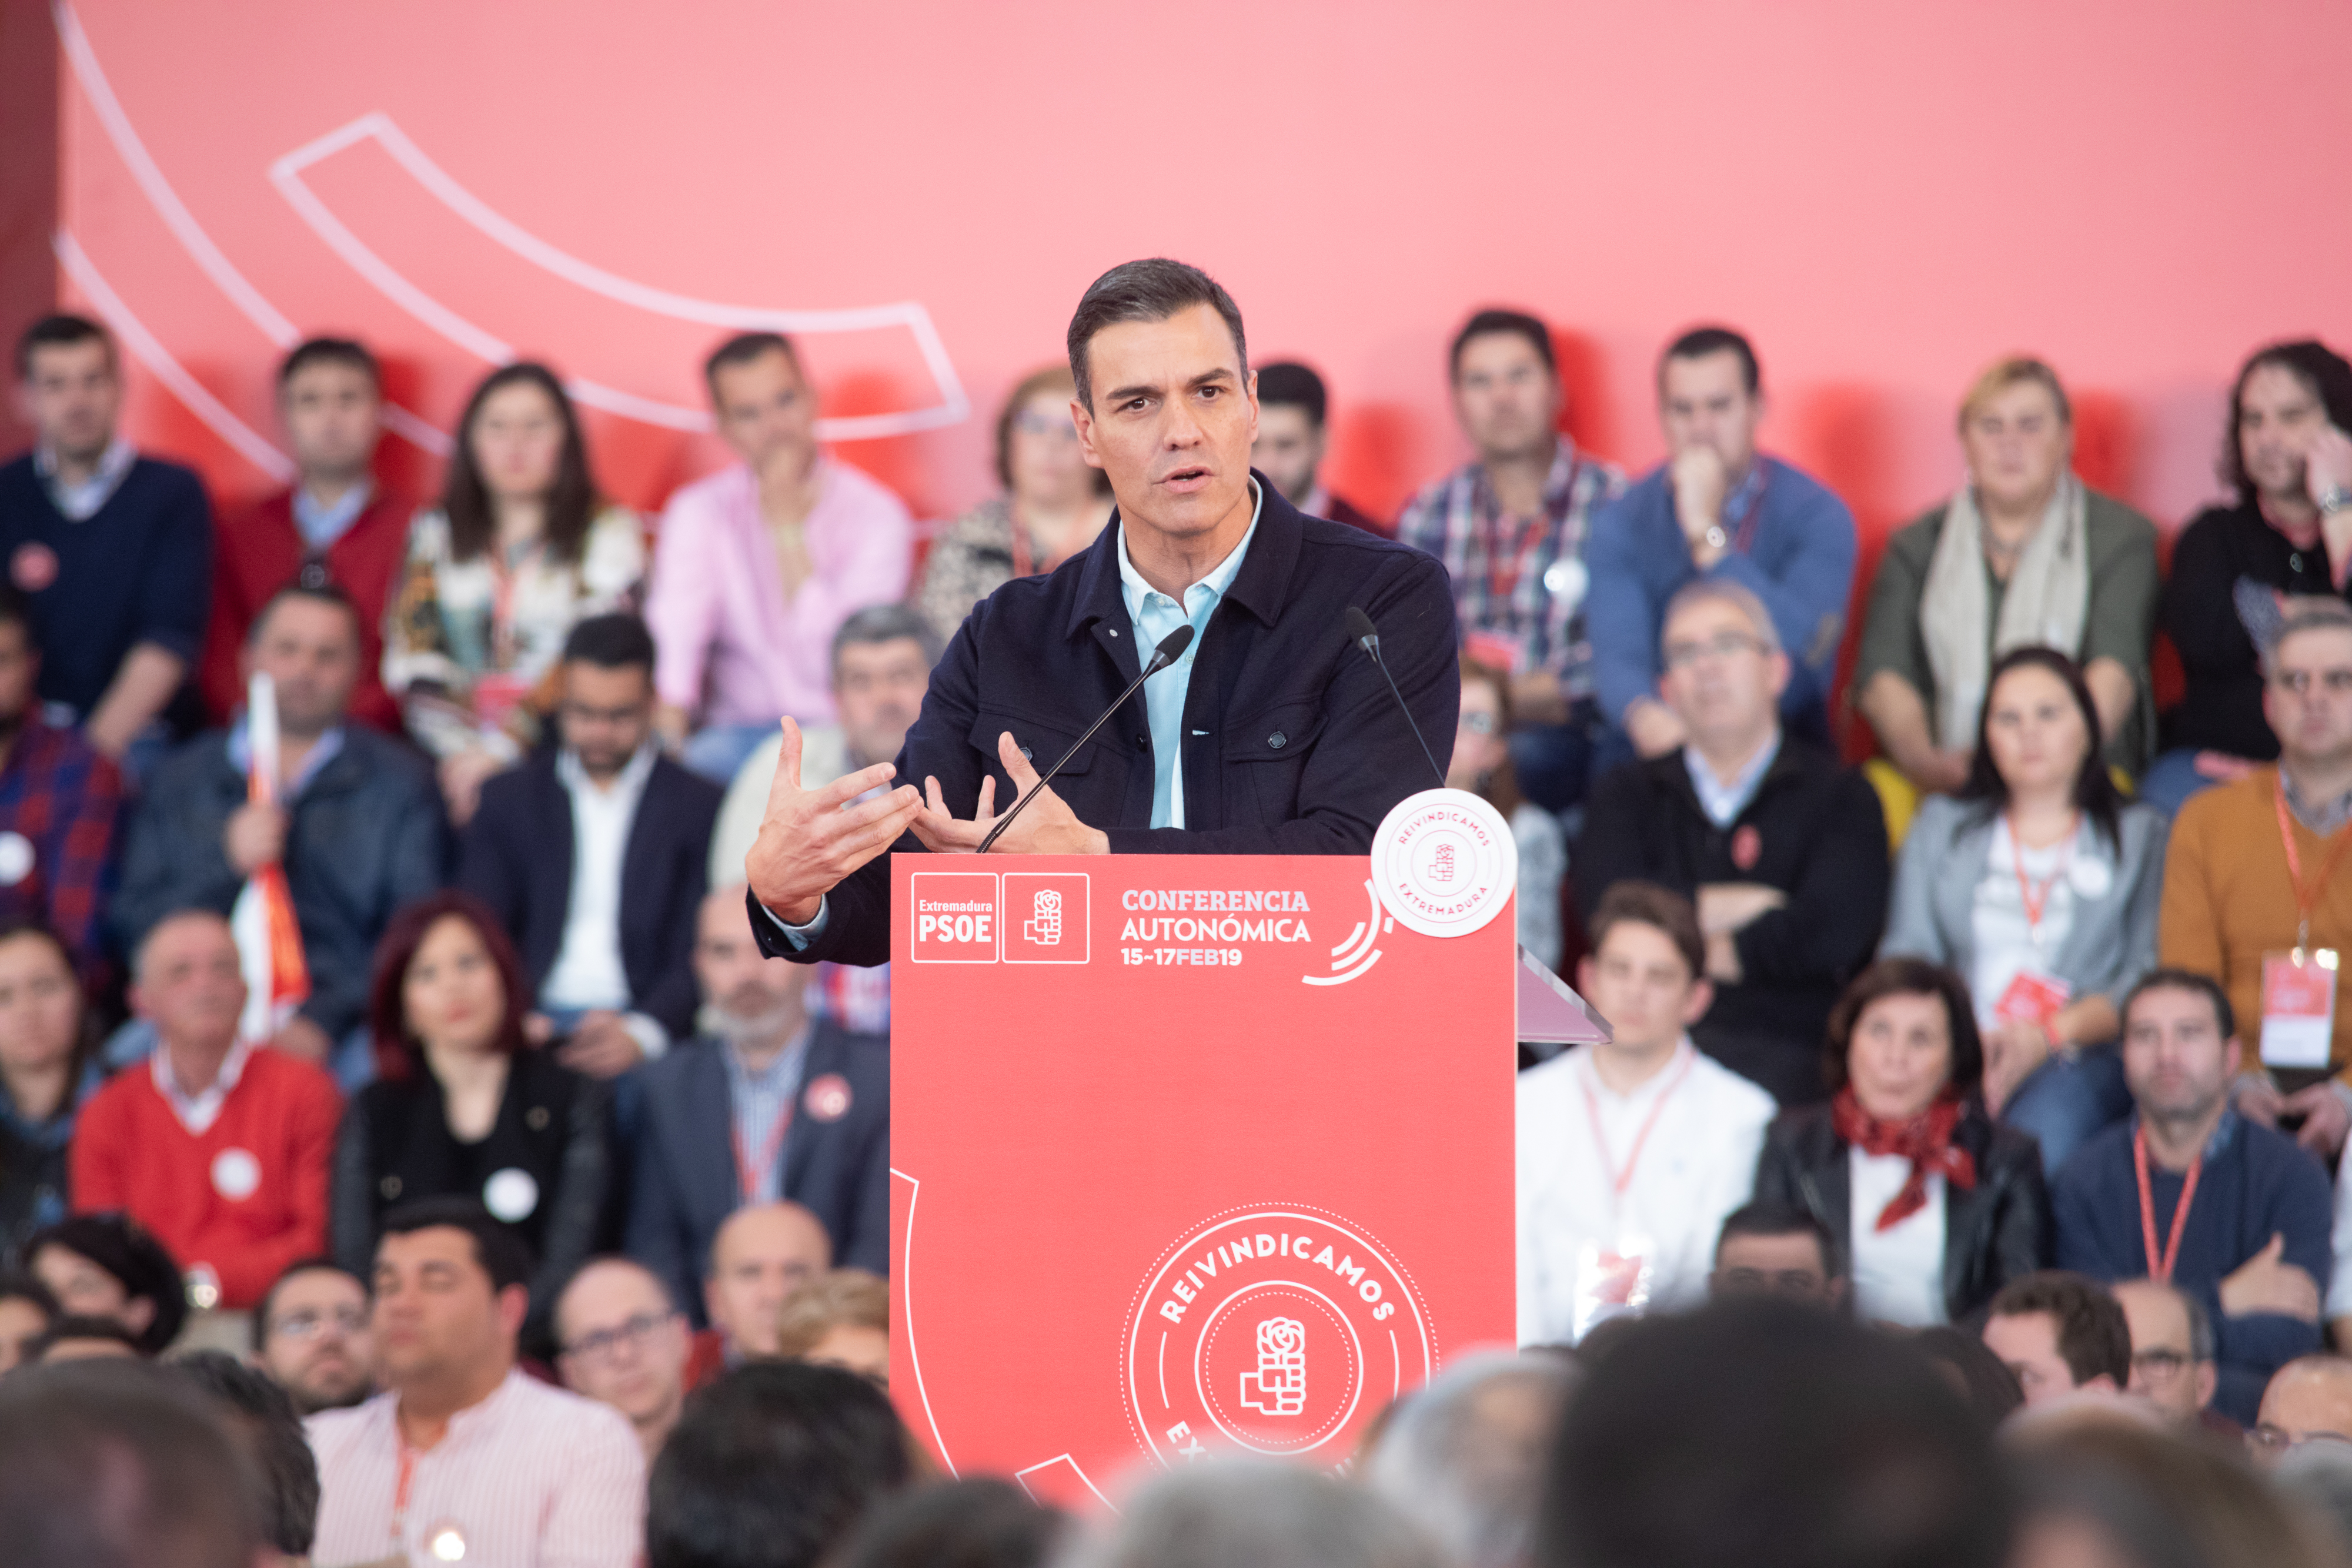 Pedro Sánchez during  a campaing event in Mérida on 17 March 2019. (by PSOE)